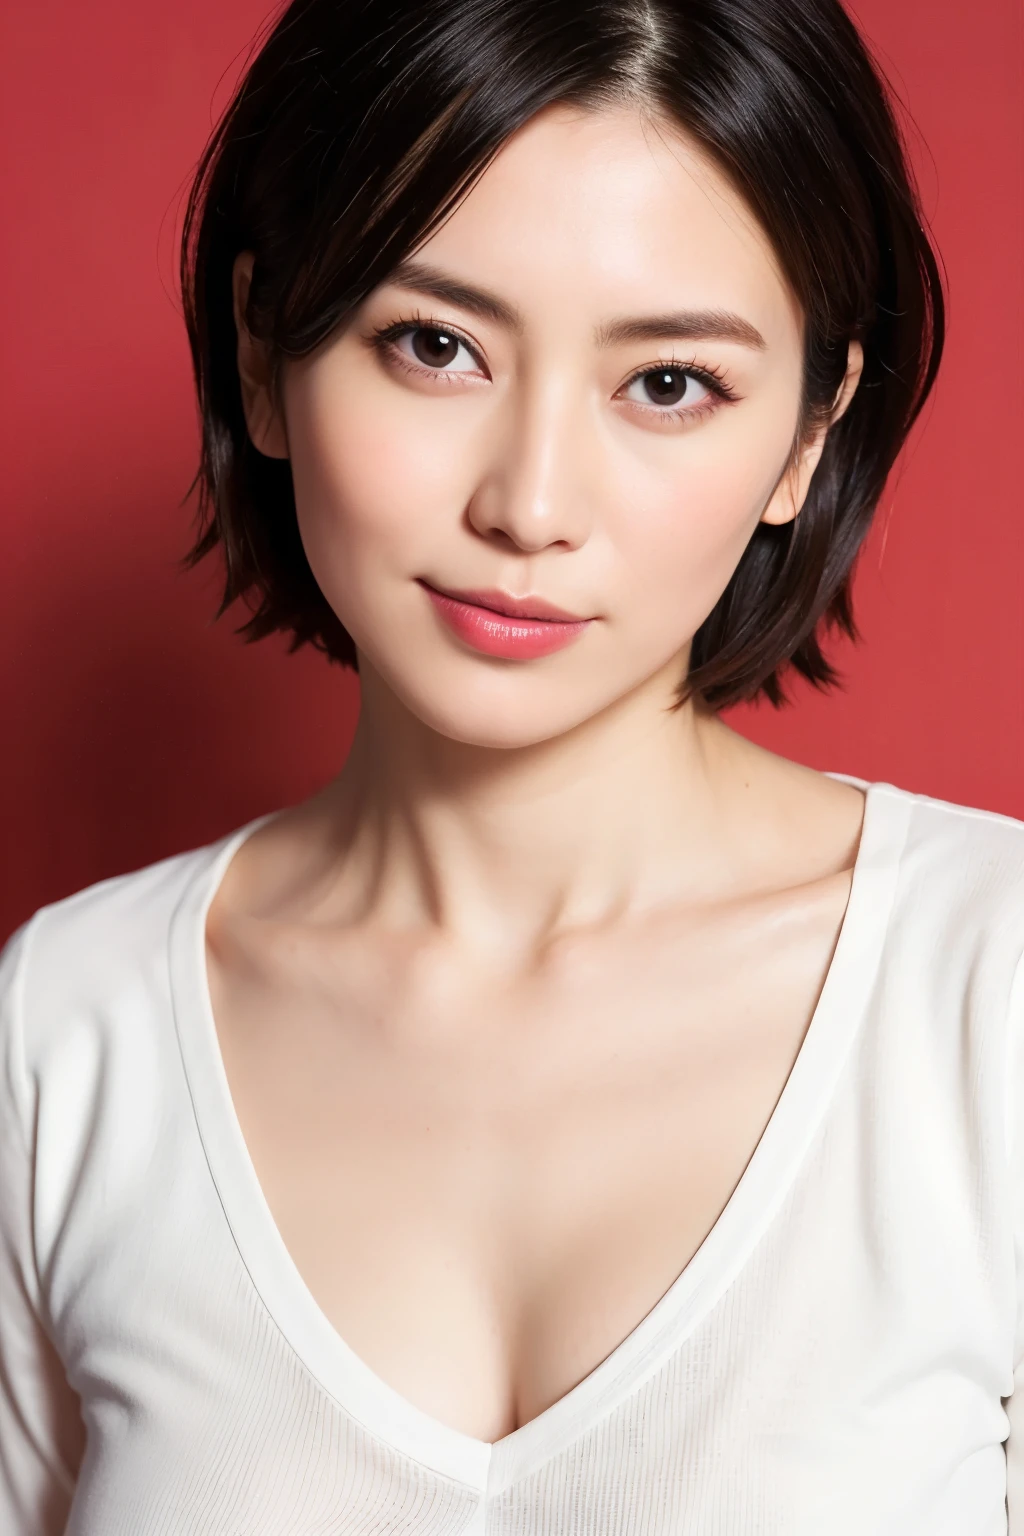 Highest quality, Realistic, Super detailed, High resolution, Plain background, 8k wallpaper, Beautiful Japanese Women, 1 person, Very cute and slim, Excellent style, Very delicate face, Super detailed skin texture, Red lipstick, Perfect Makeup, short hair, straggling hair, Gradient Hair, Super detailedな目と鼻, Sharp Eyes, Simple Background, Looking at the audience, Upper Body Shot, Cleavage, V-neck light knit